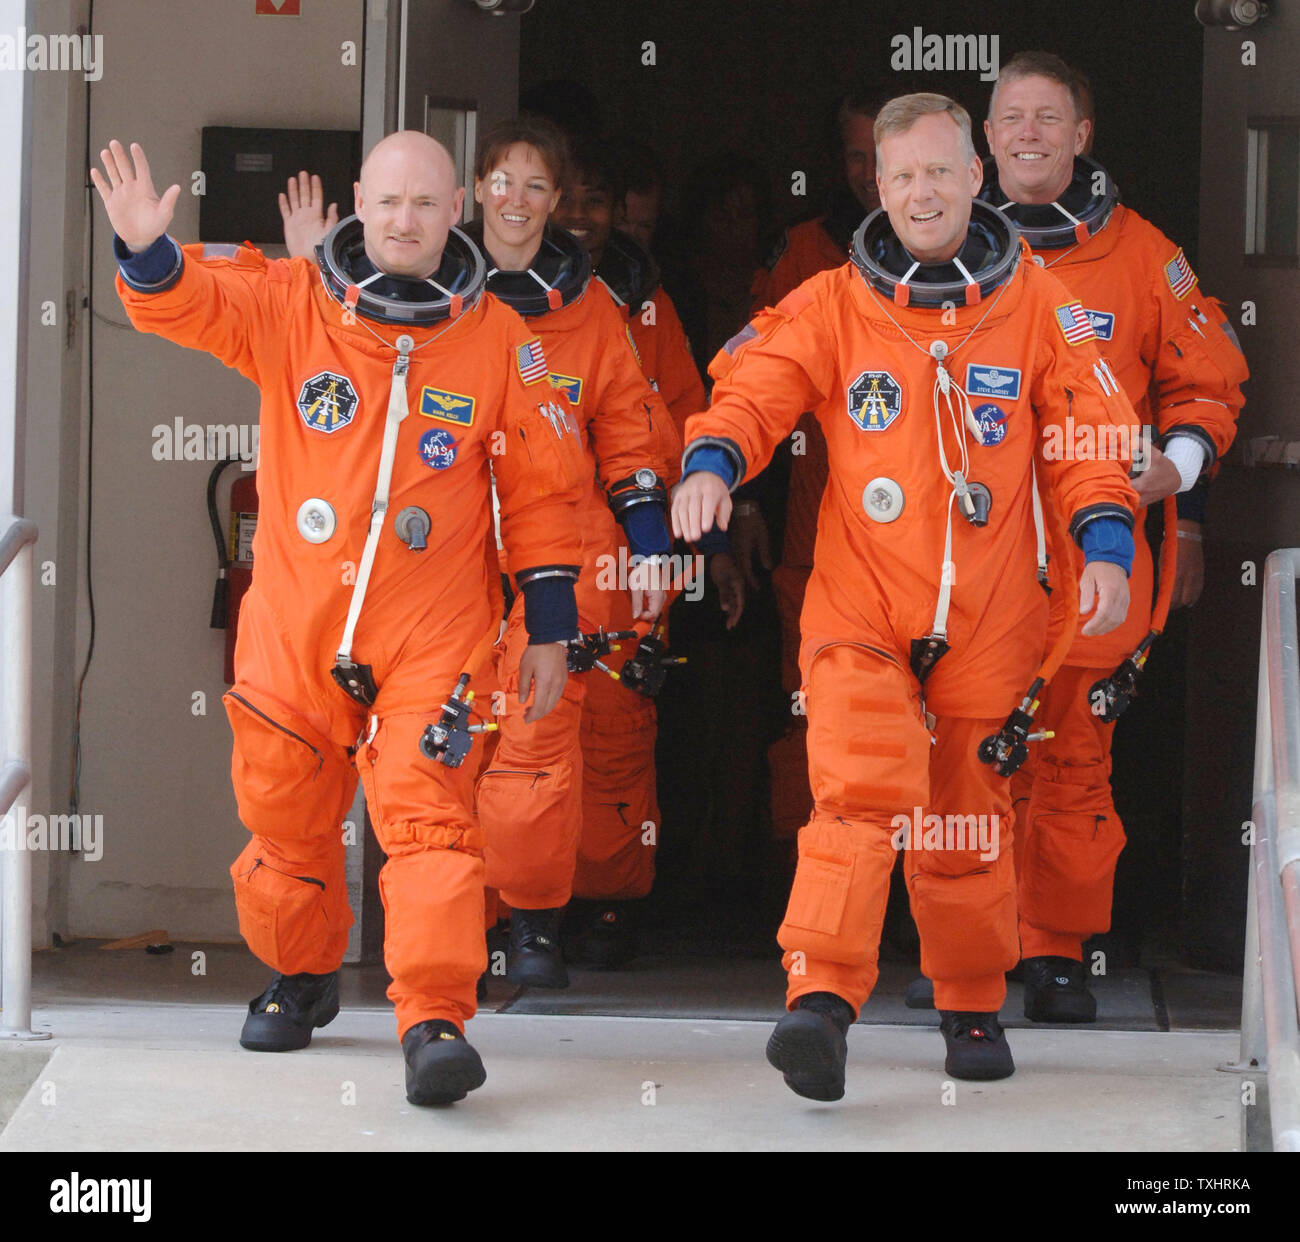 Commander Steven Lindsey (R) and Pilot Mark Kelly (L) lead Mission Specialists  Lisa Nowak (2nd Row,L), Michael Fossum (2nd row,R). plus Stephanie Wilson, Piers Sellers, and Thomas Reiter out of the Operations and Checkout Building to board the NASA Astrovan en route to the Space Shuttle Discovery for mission STS-121 at Cape Canaveral, Florida on July 1, 2006.  (UPI Photo/Pat Benic) Stock Photo